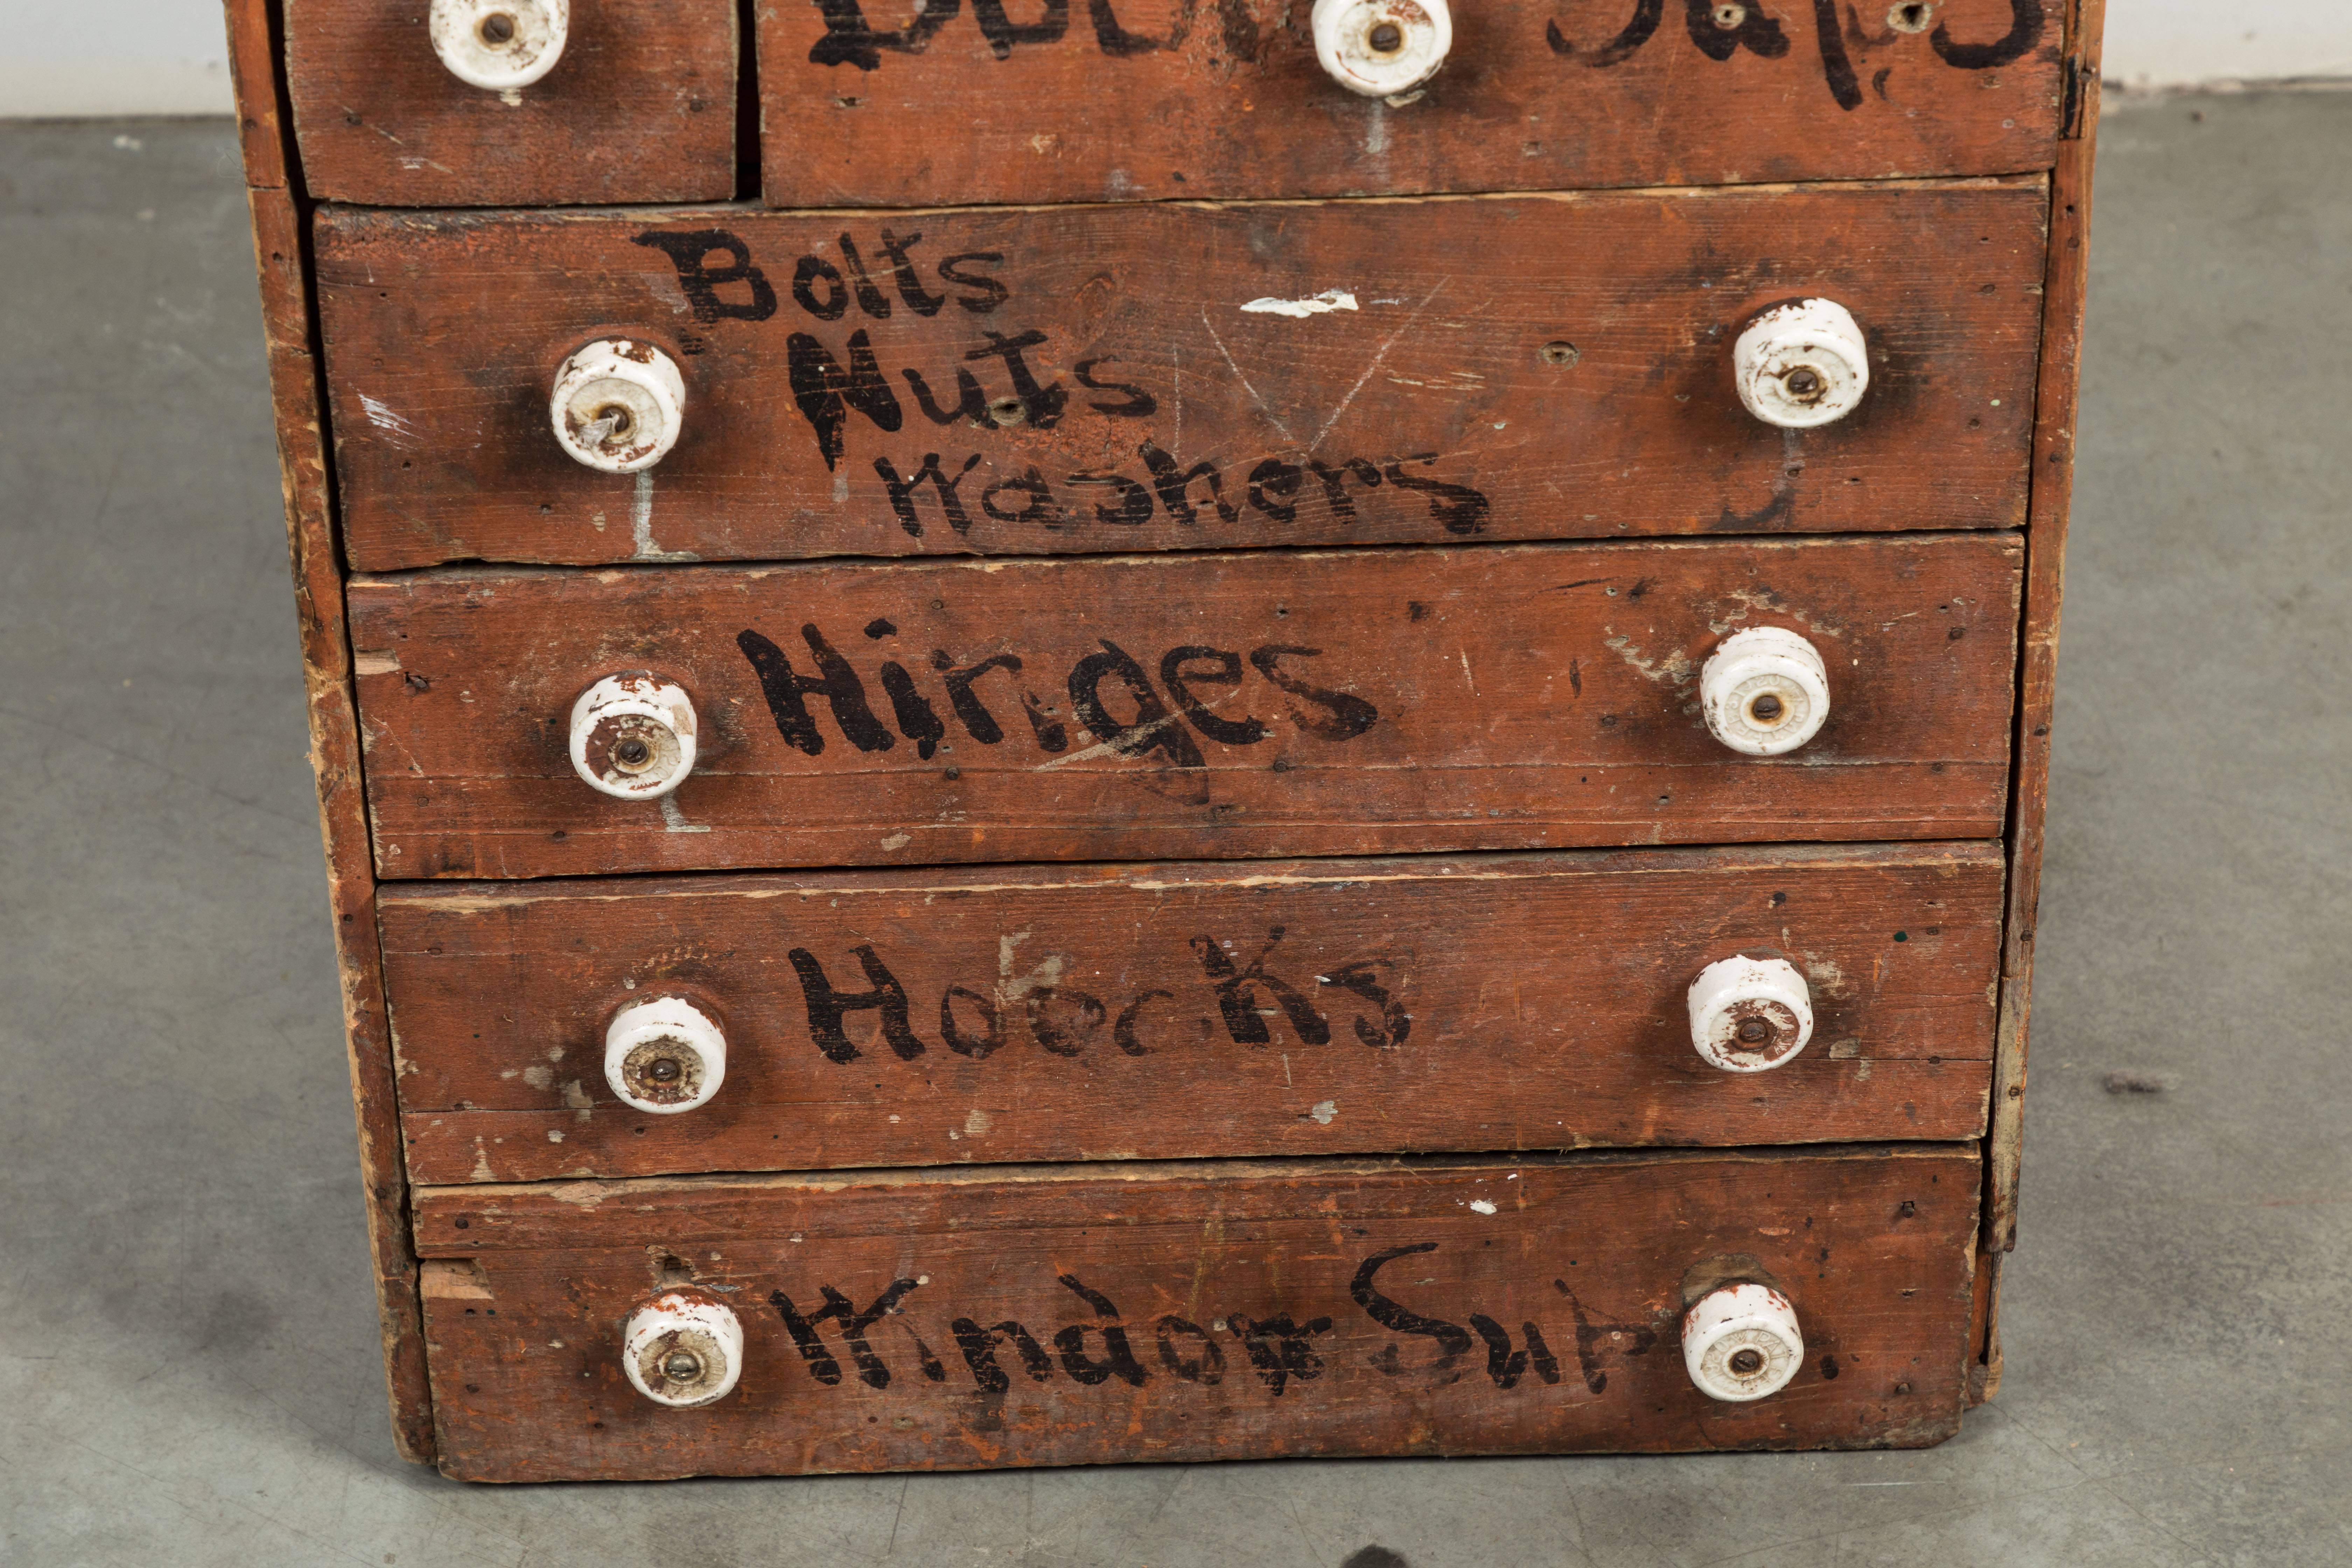 Folk Art General Store Hardware Cubby Apothecary Bins Found in the Midwest, circa 1900